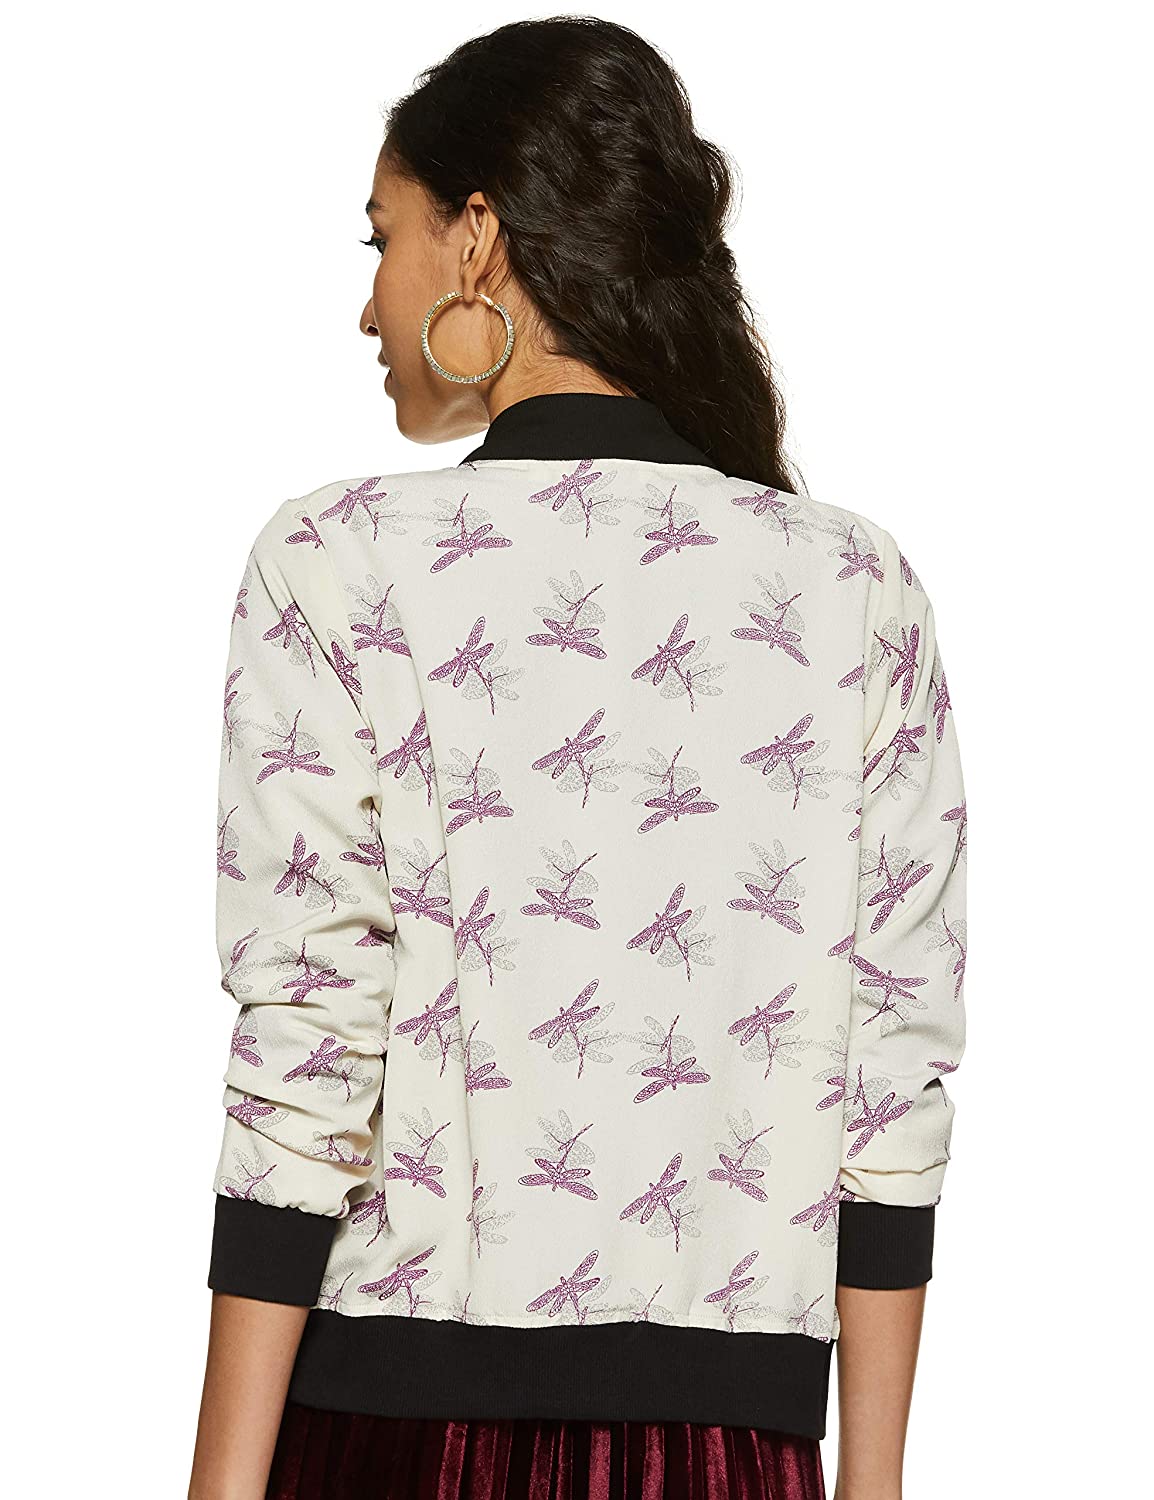 Miss Chase Women's Multicolored Printed Bomber Jacket